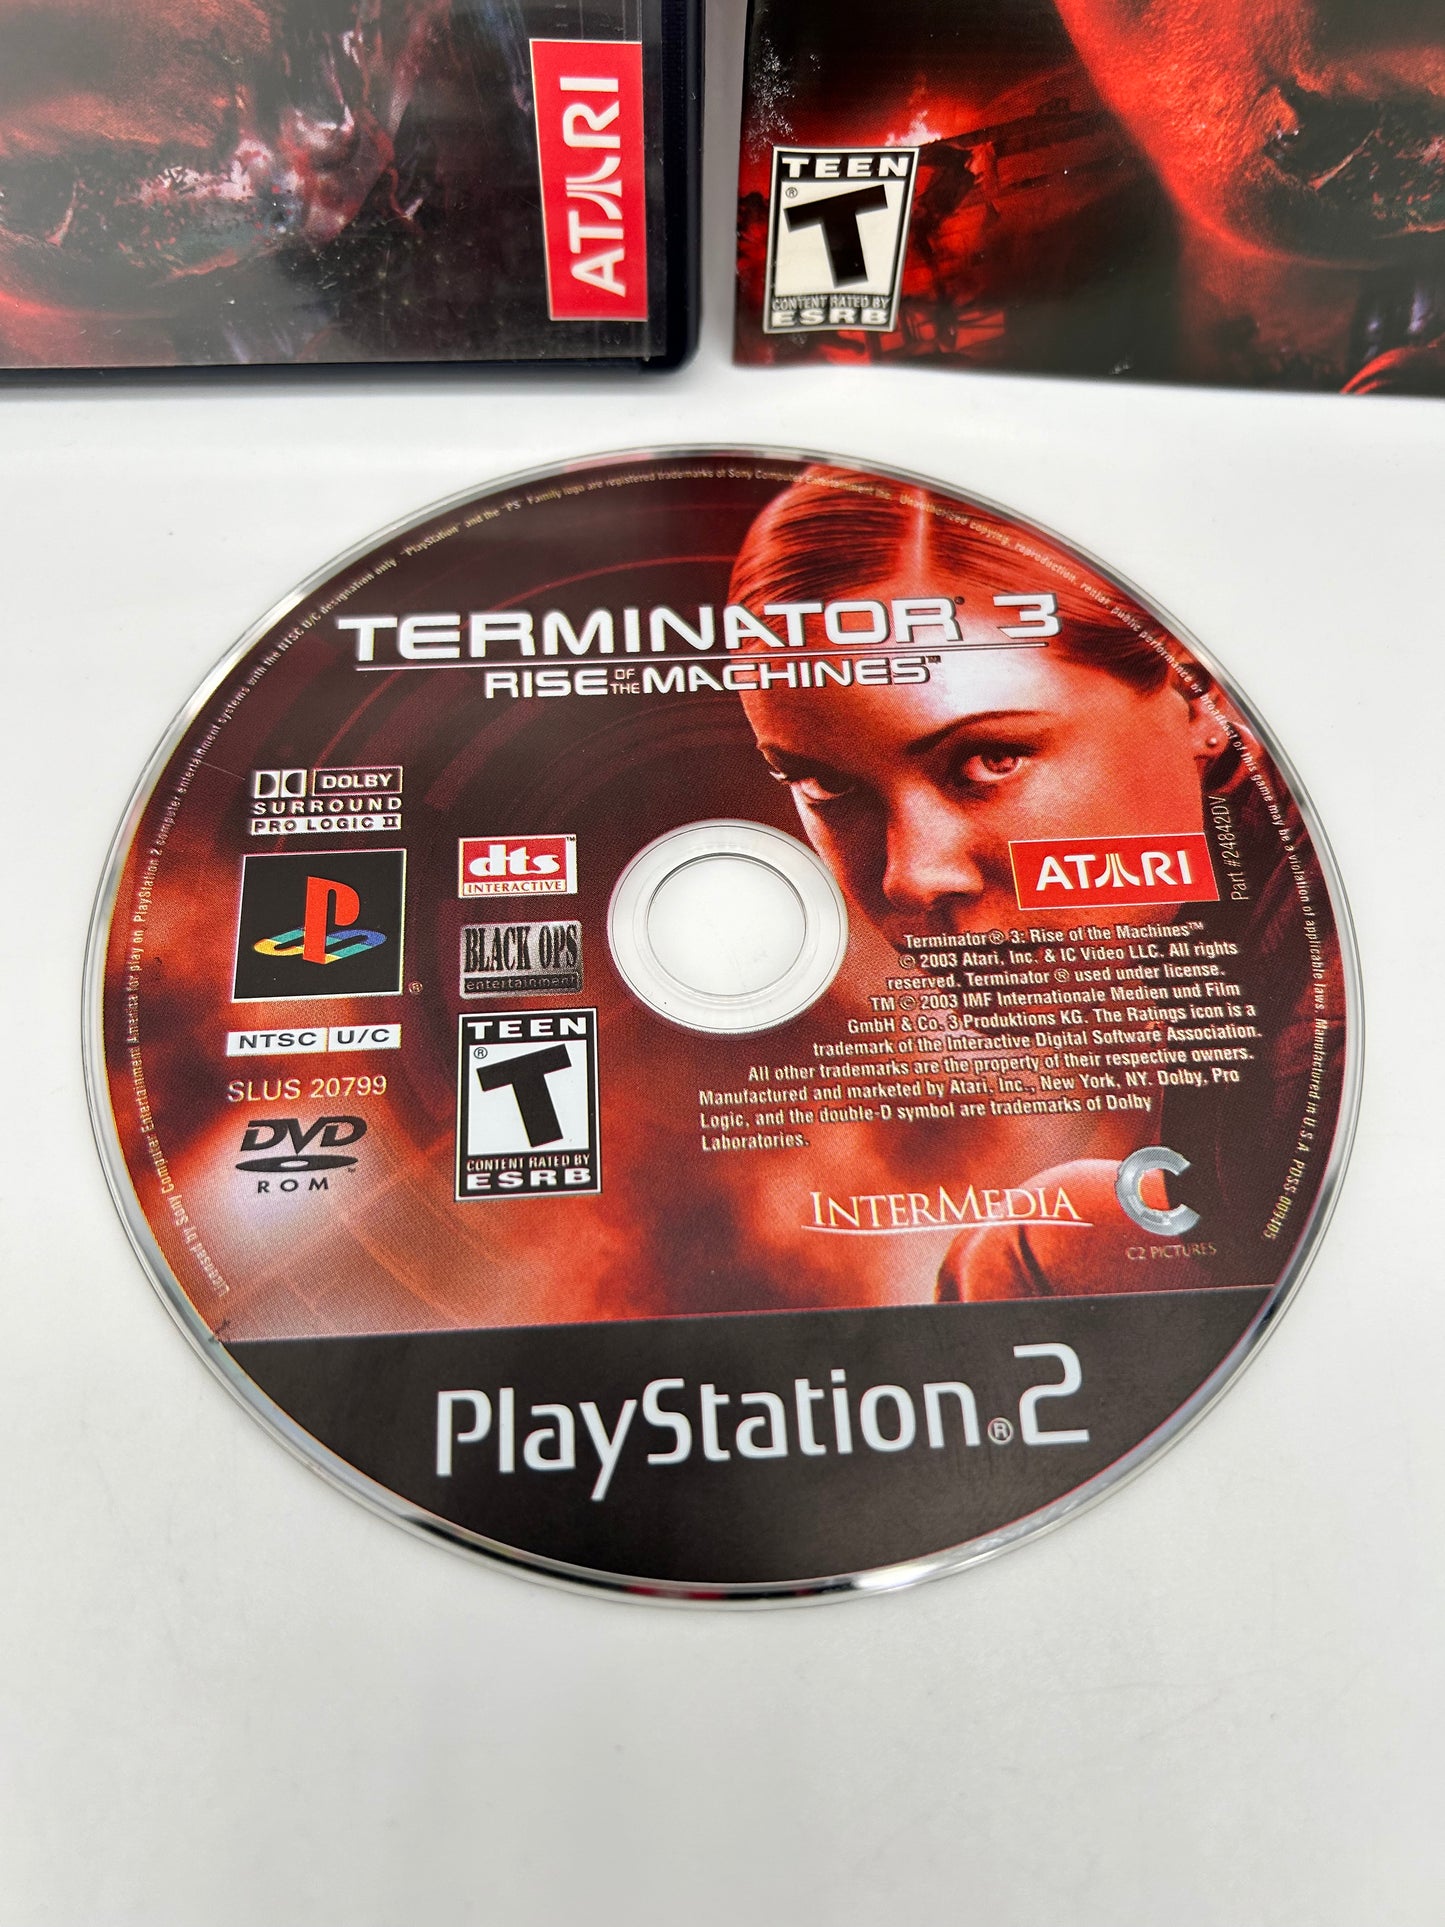 SONY PLAYSTATiON 2 [PS2] | TERMiNATOR 3 RiSE OF THE MACHiNES